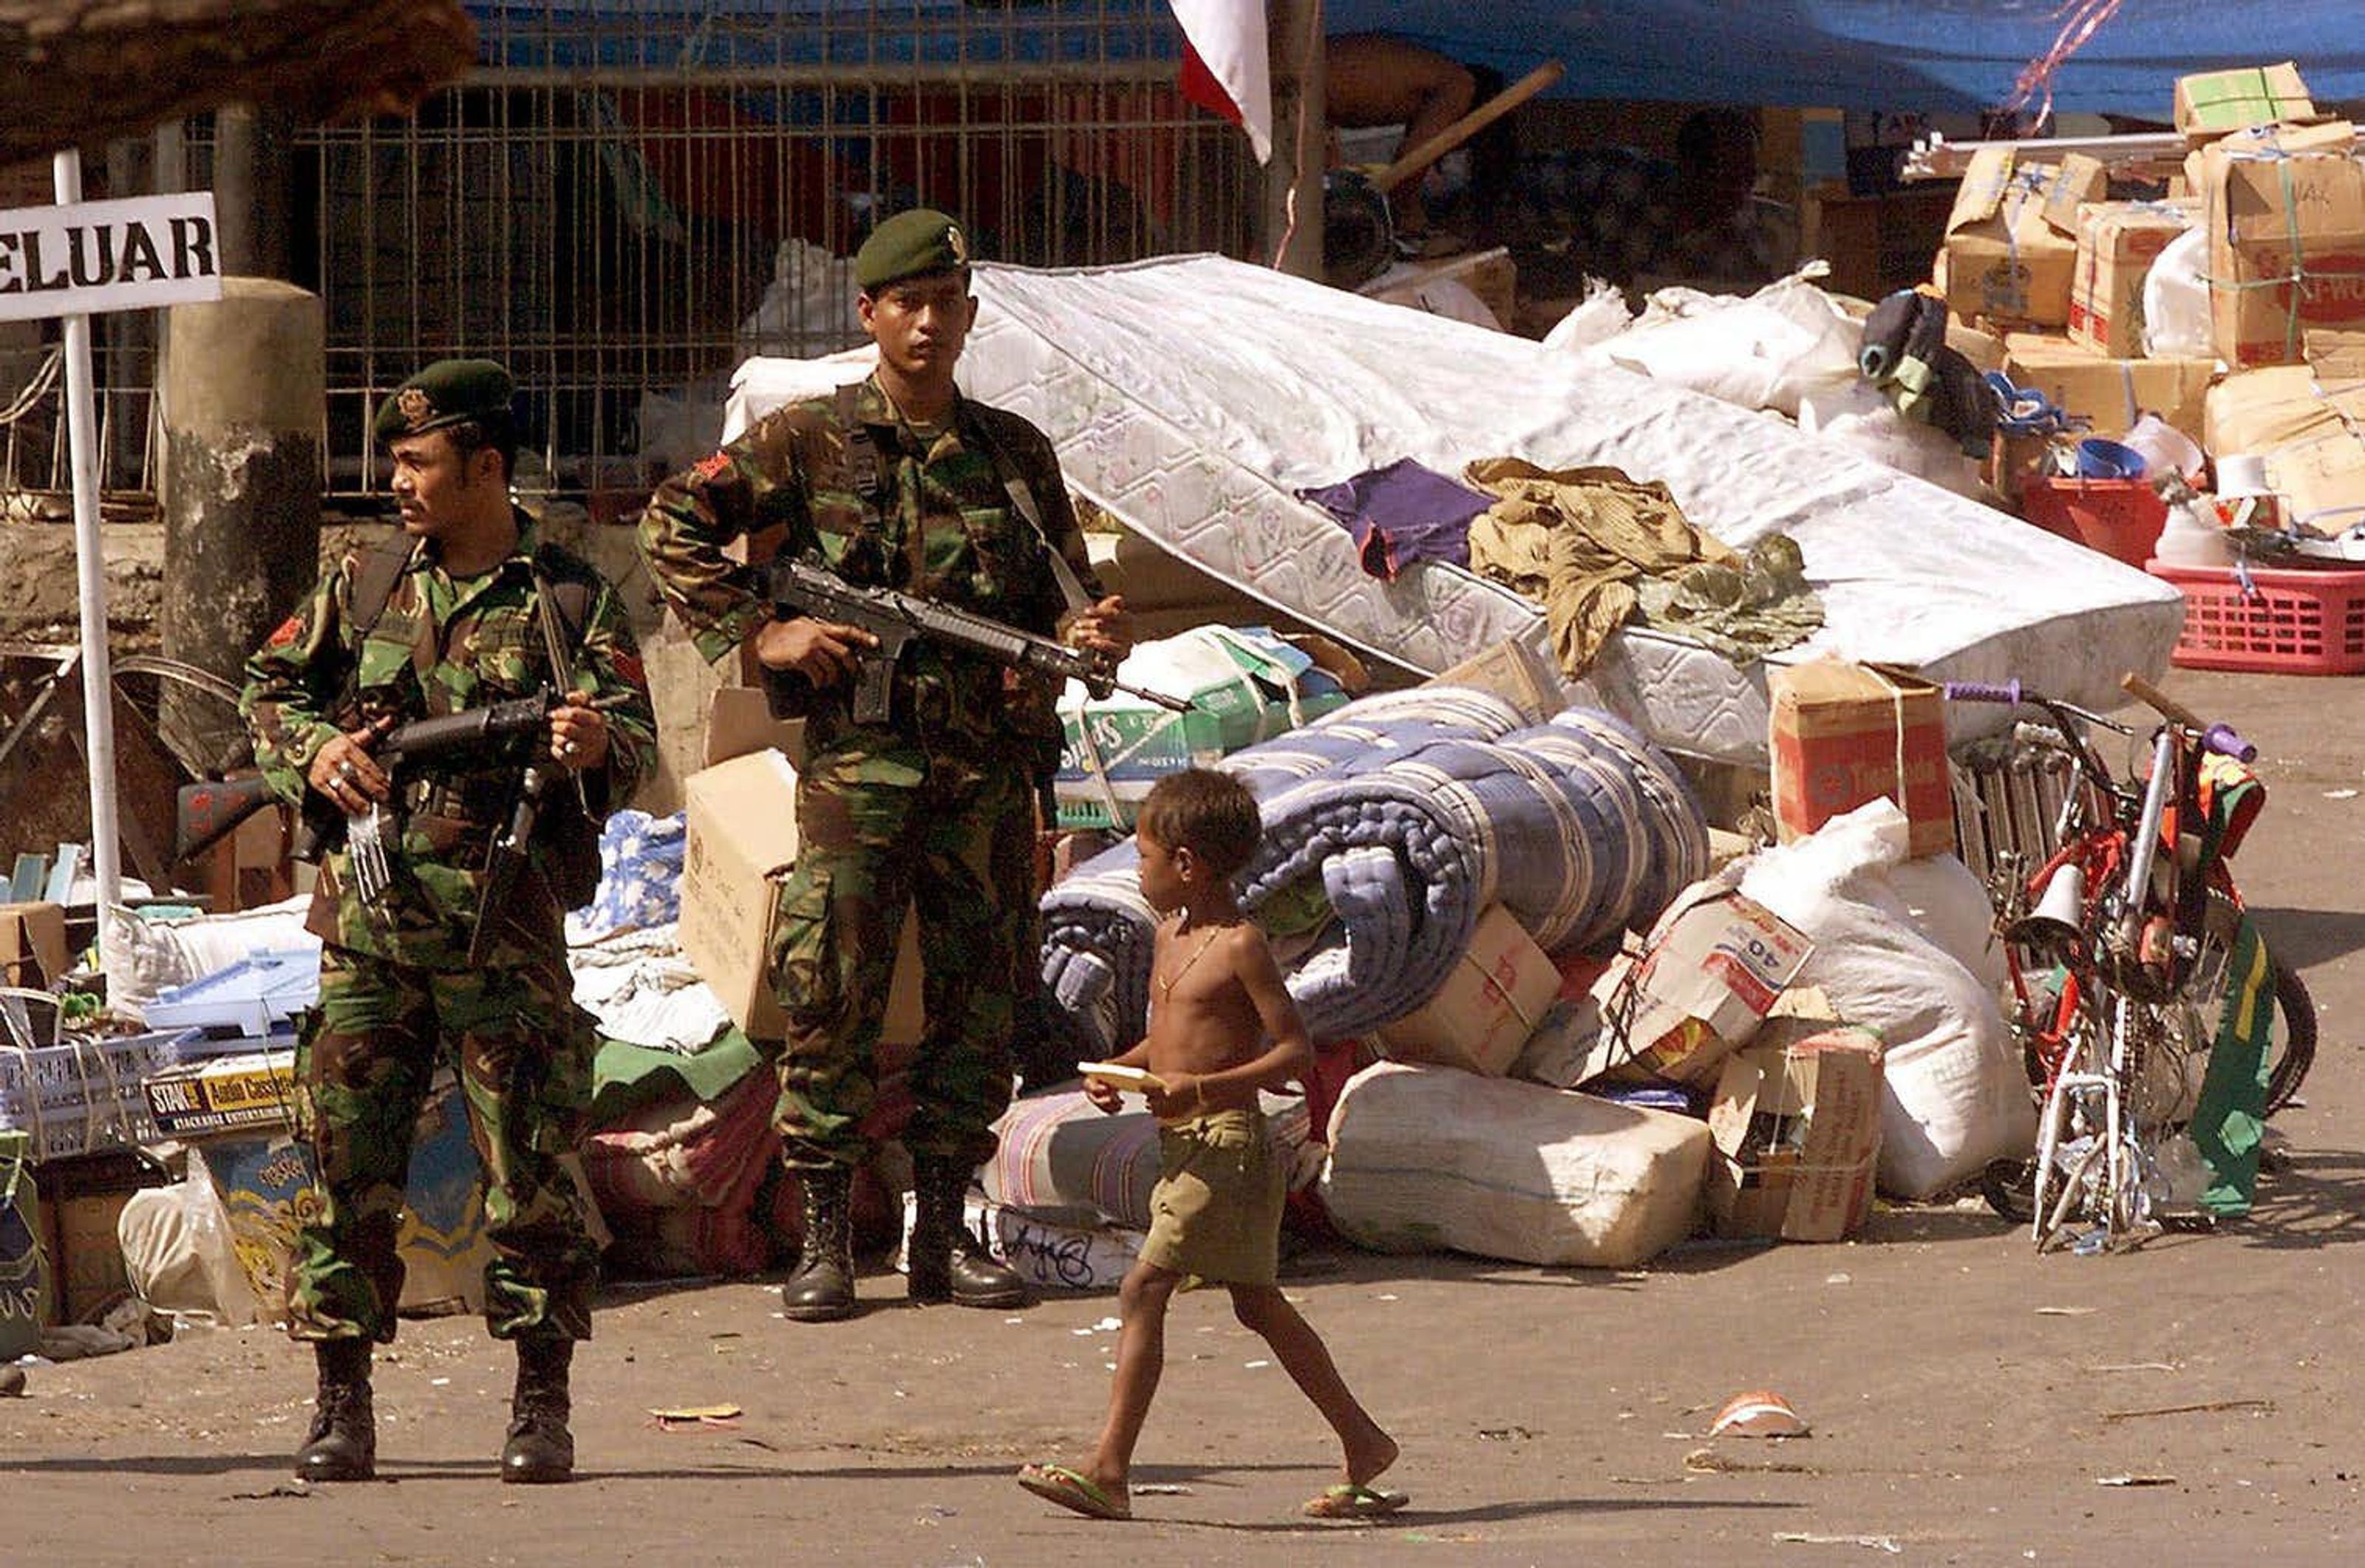 A Timorese child walks past Indonesian soldiers in Dili